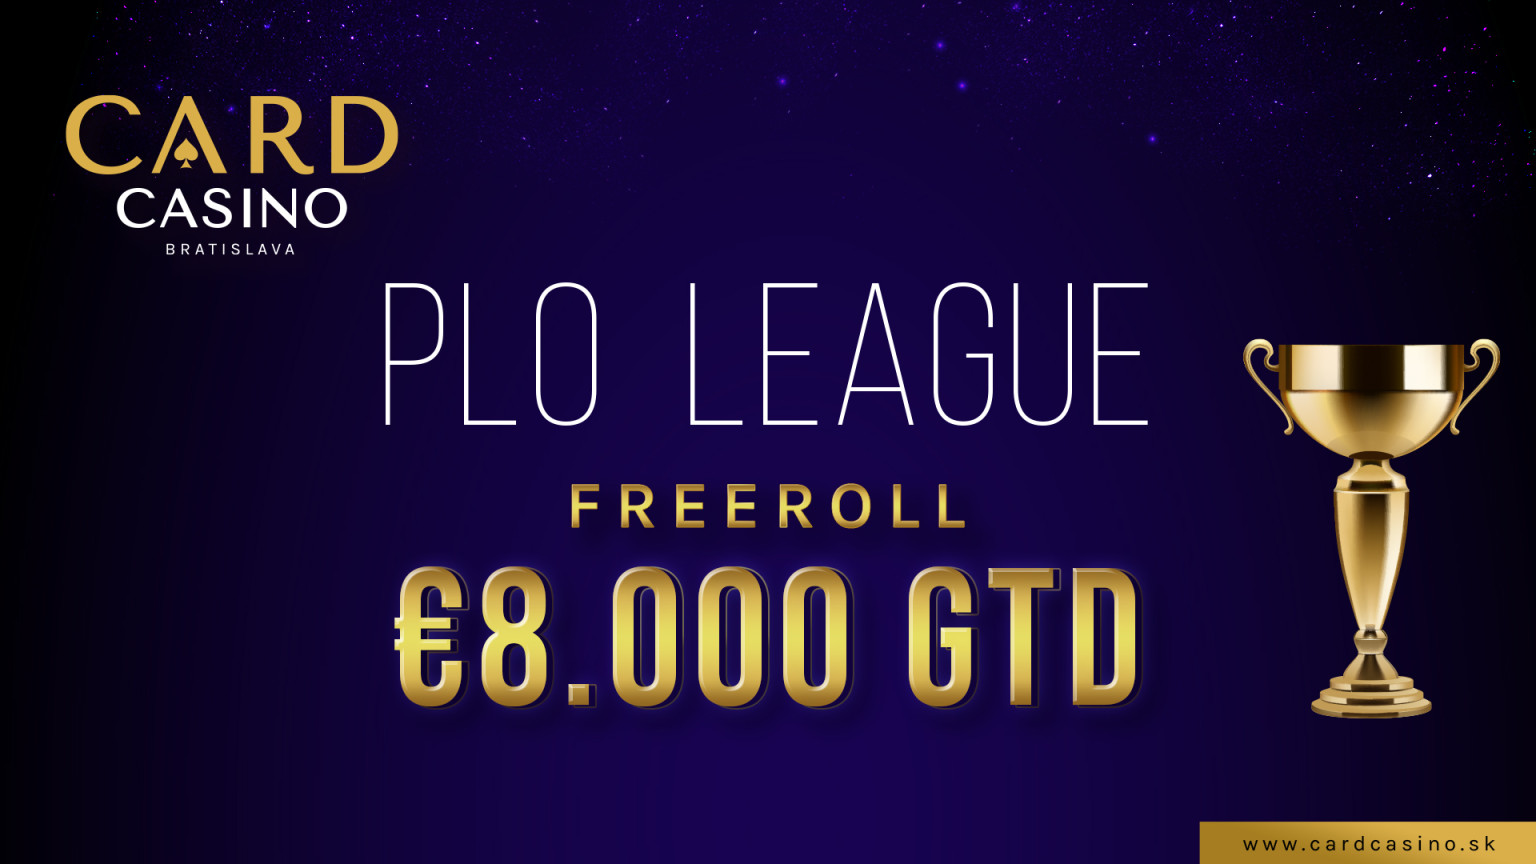 The popular Pot Limit Omaha league is back. Tournaments and a €8.000 Freeroll await you!